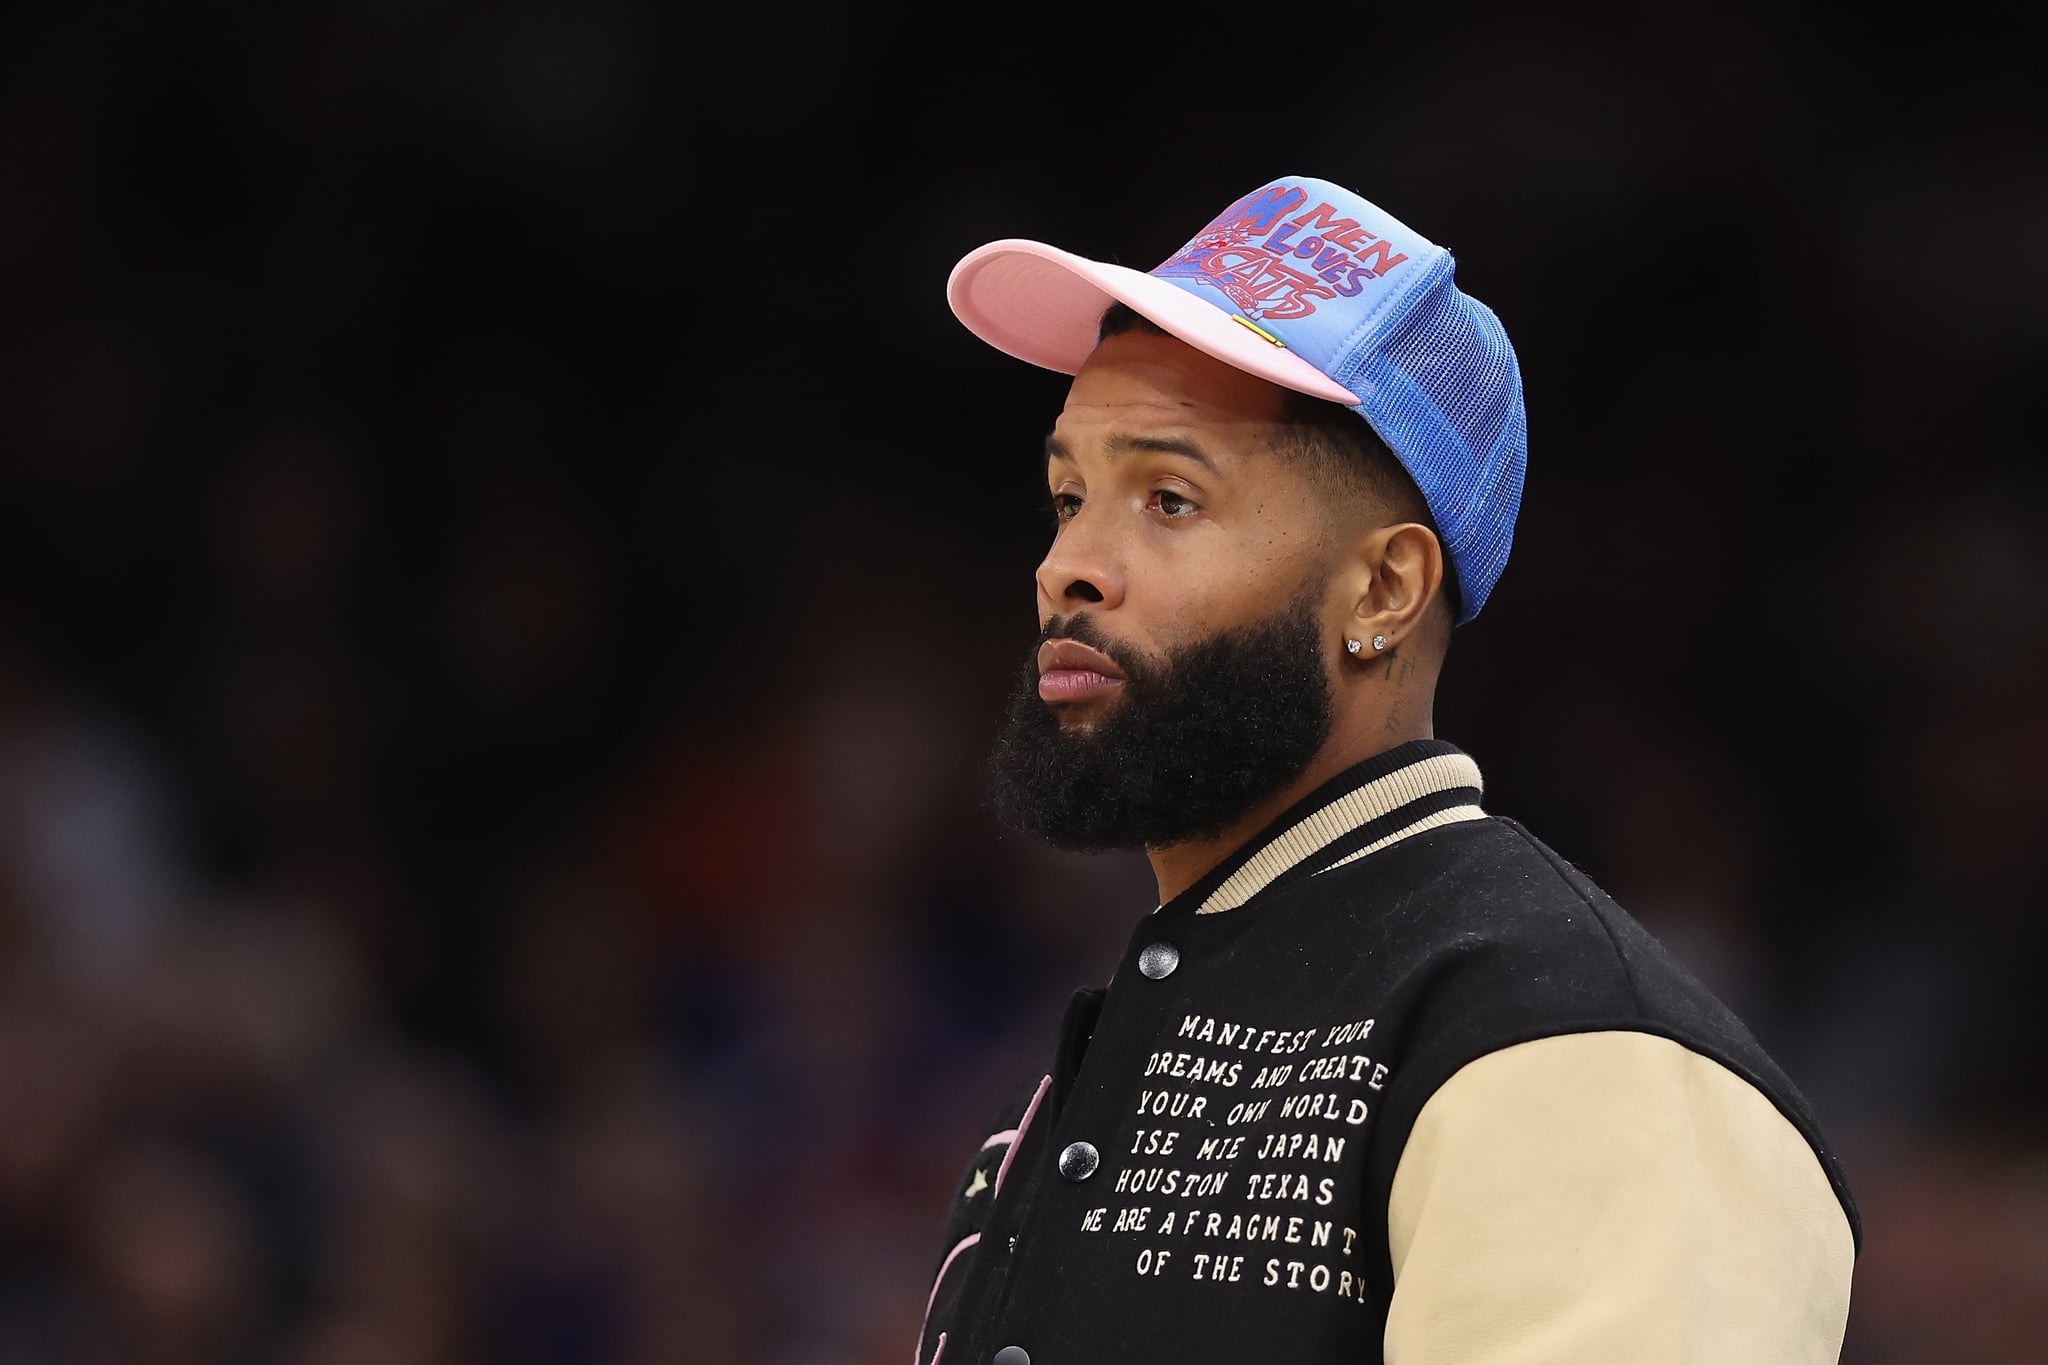 PHOENIX, ARIZONA - DECEMBER 17:  NFL athlete Odell Beckham Jr. attends the NBA game between the Phoenix Suns and the New Orleans Pelicans at Footprint Centre on December 17, 2022 in Phoenix, Arizona. The Suns defeated the Pelicans 118-114.  NOTE TO USER: User expressly acknowledges and agrees that, by downloading and or using this photograph, User is consenting to the terms and conditions of the Getty Images Licence Agreement. (Photo by Christian Petersen/Getty Images)